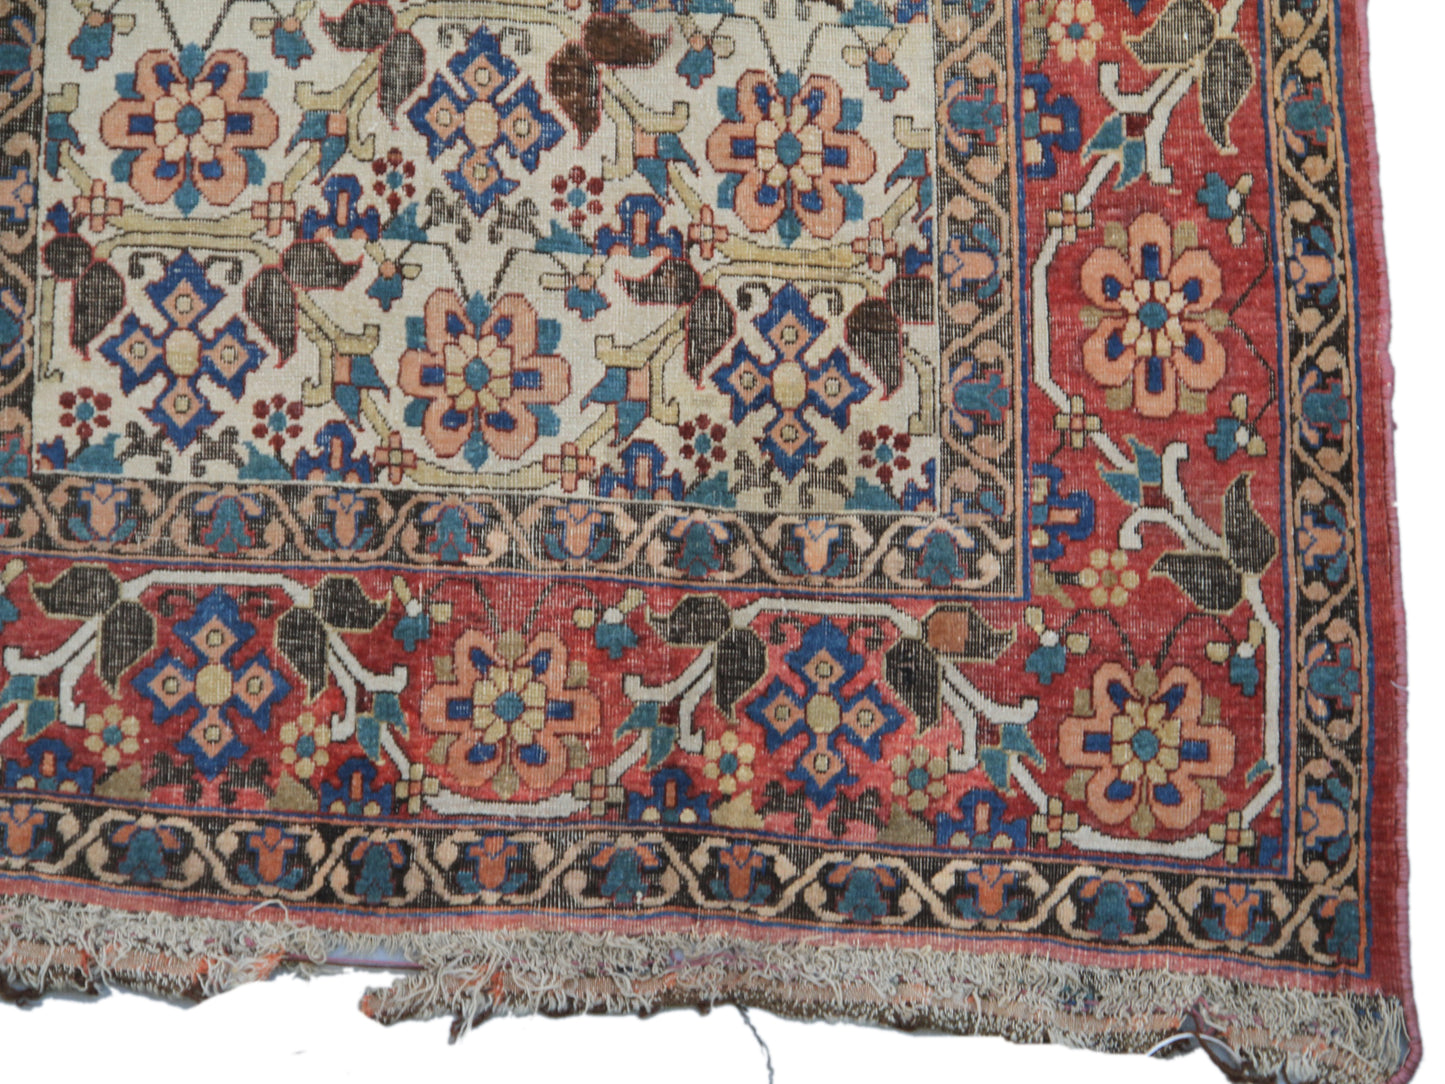 4'x6' Antique and Semi Antique Persian Afshar Rug